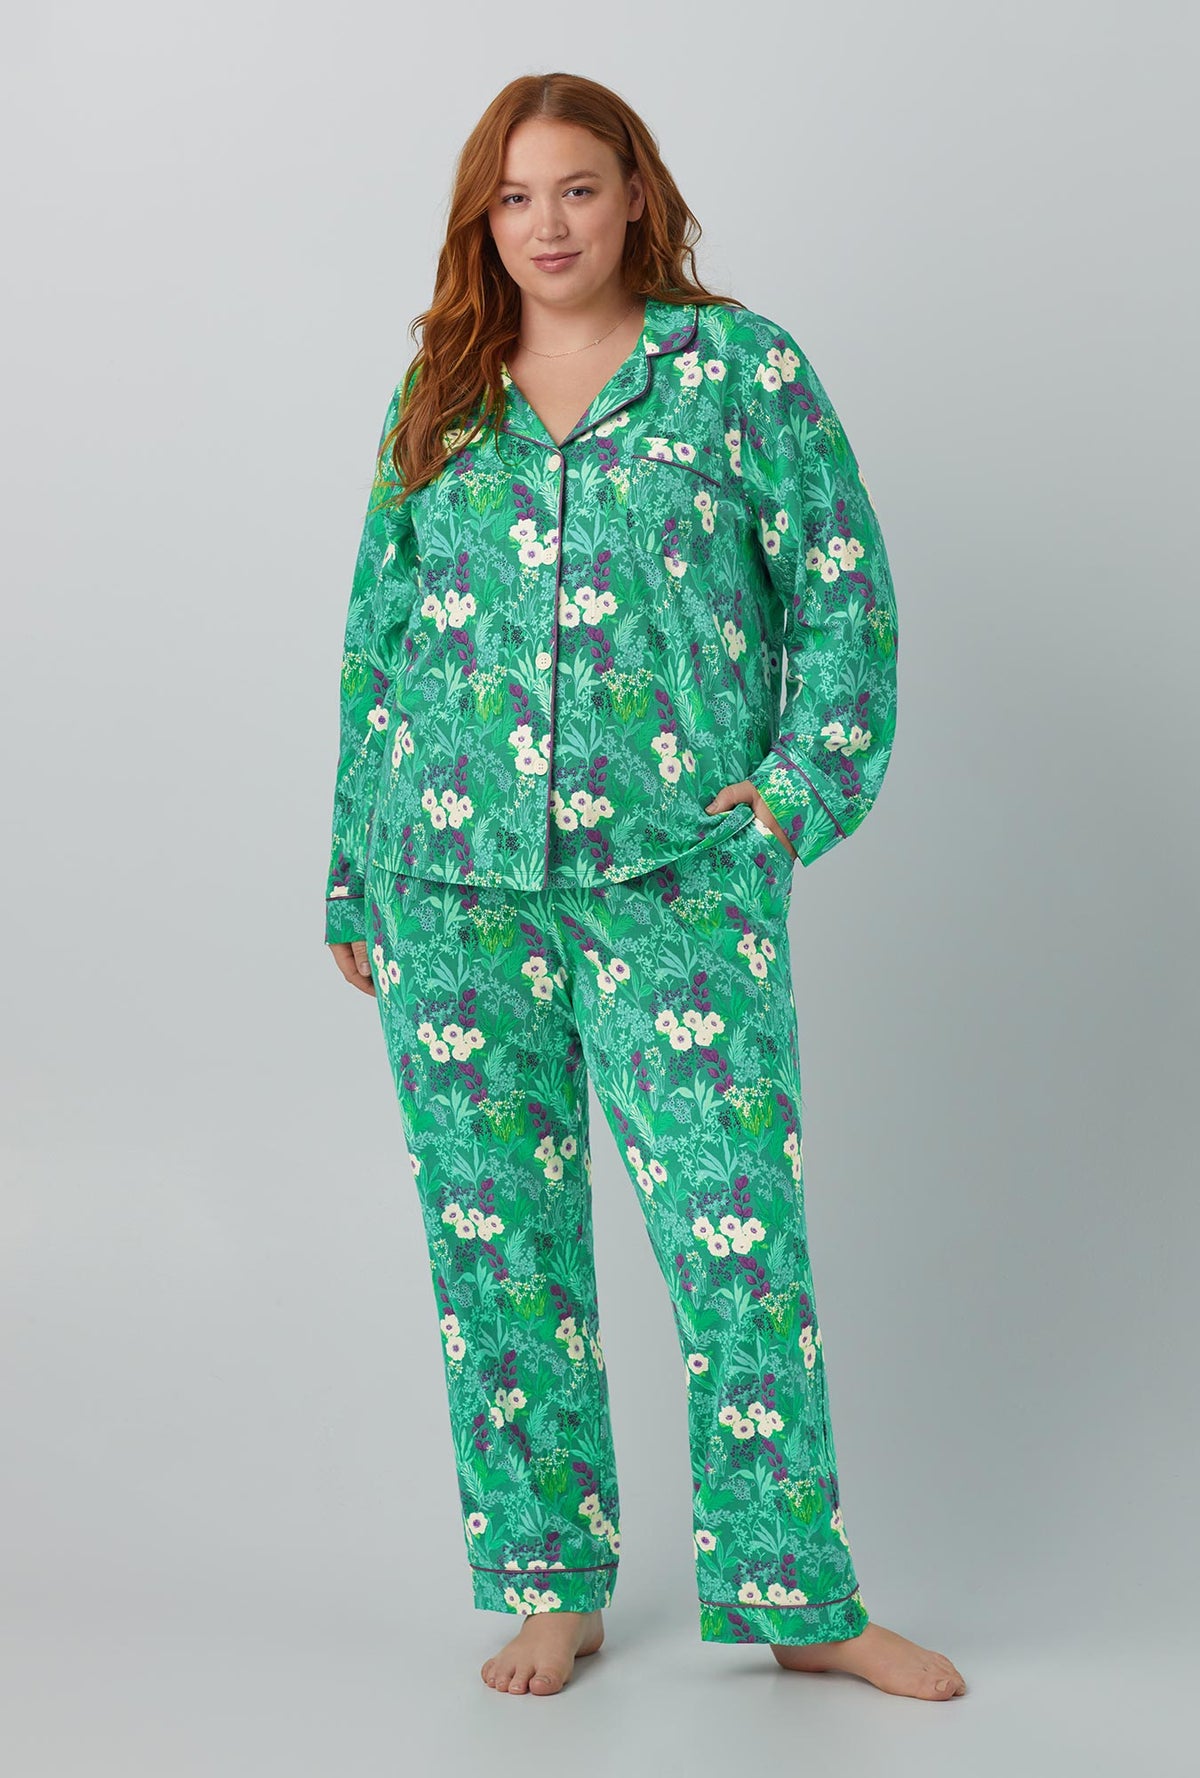 A lady wearing green  Long Sleeve Classic Stretch Jersey PJ Set with Wintergreens  print